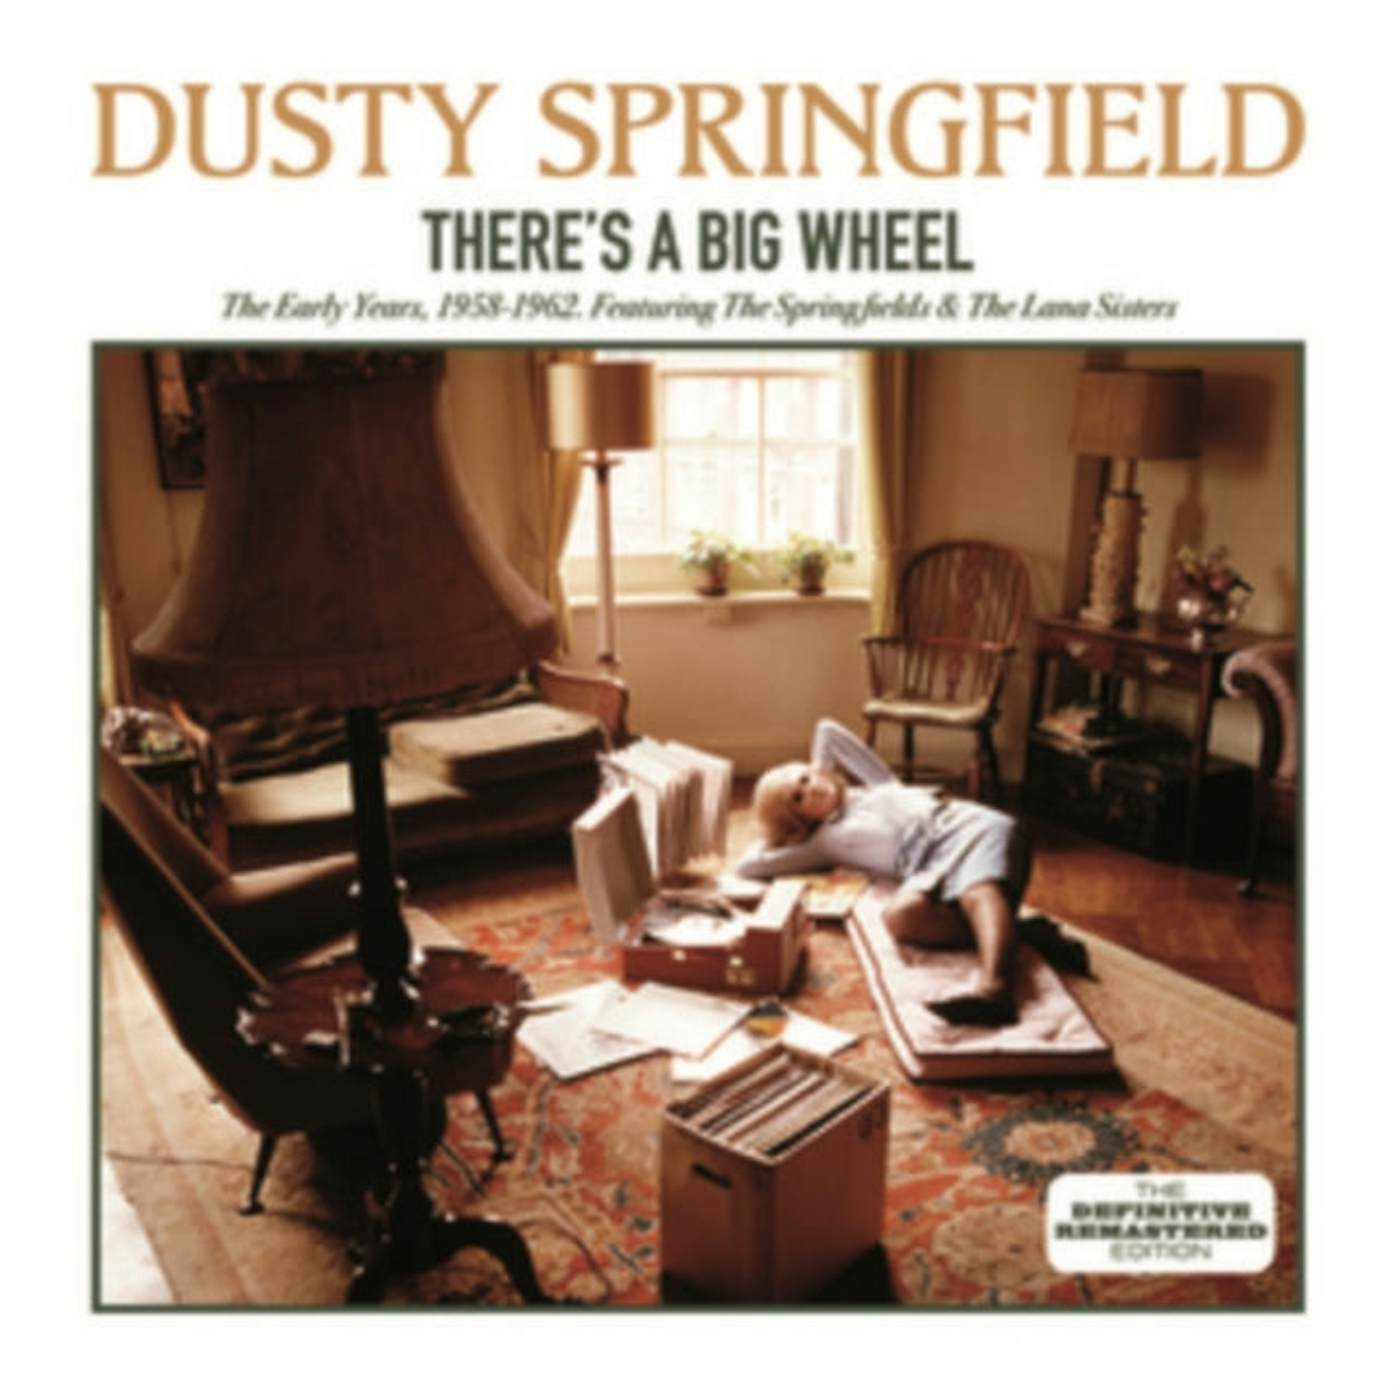 Dusty Springfield CD - There's A Big Wheel (19 58-19 62)